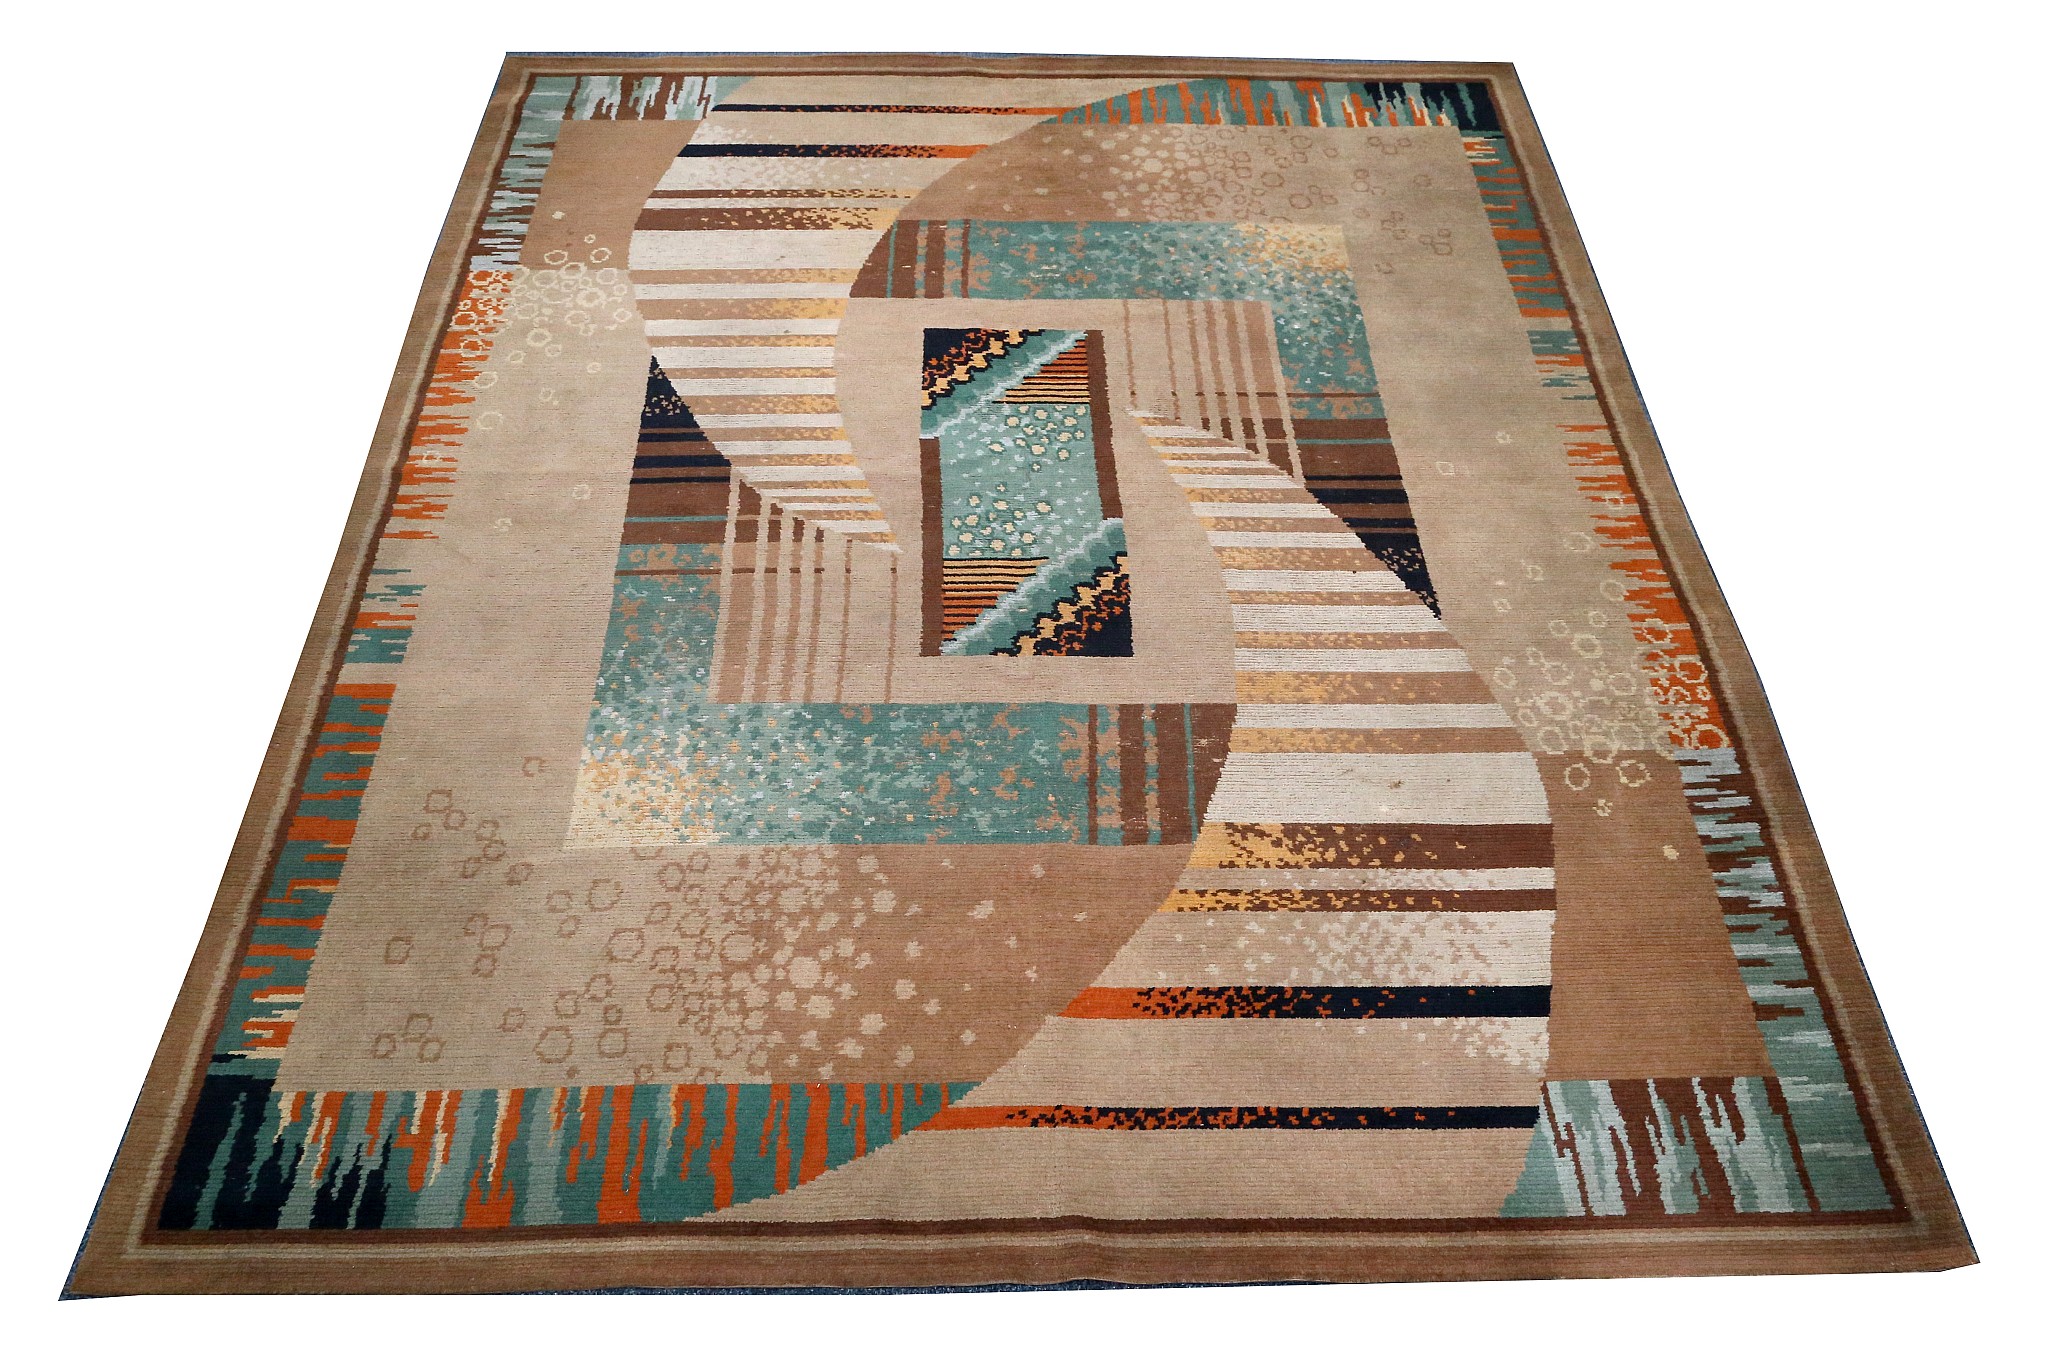 Art Deco, machine-made carpet, possibly English, with original ticket dated from 1932, 3.19m x 2.